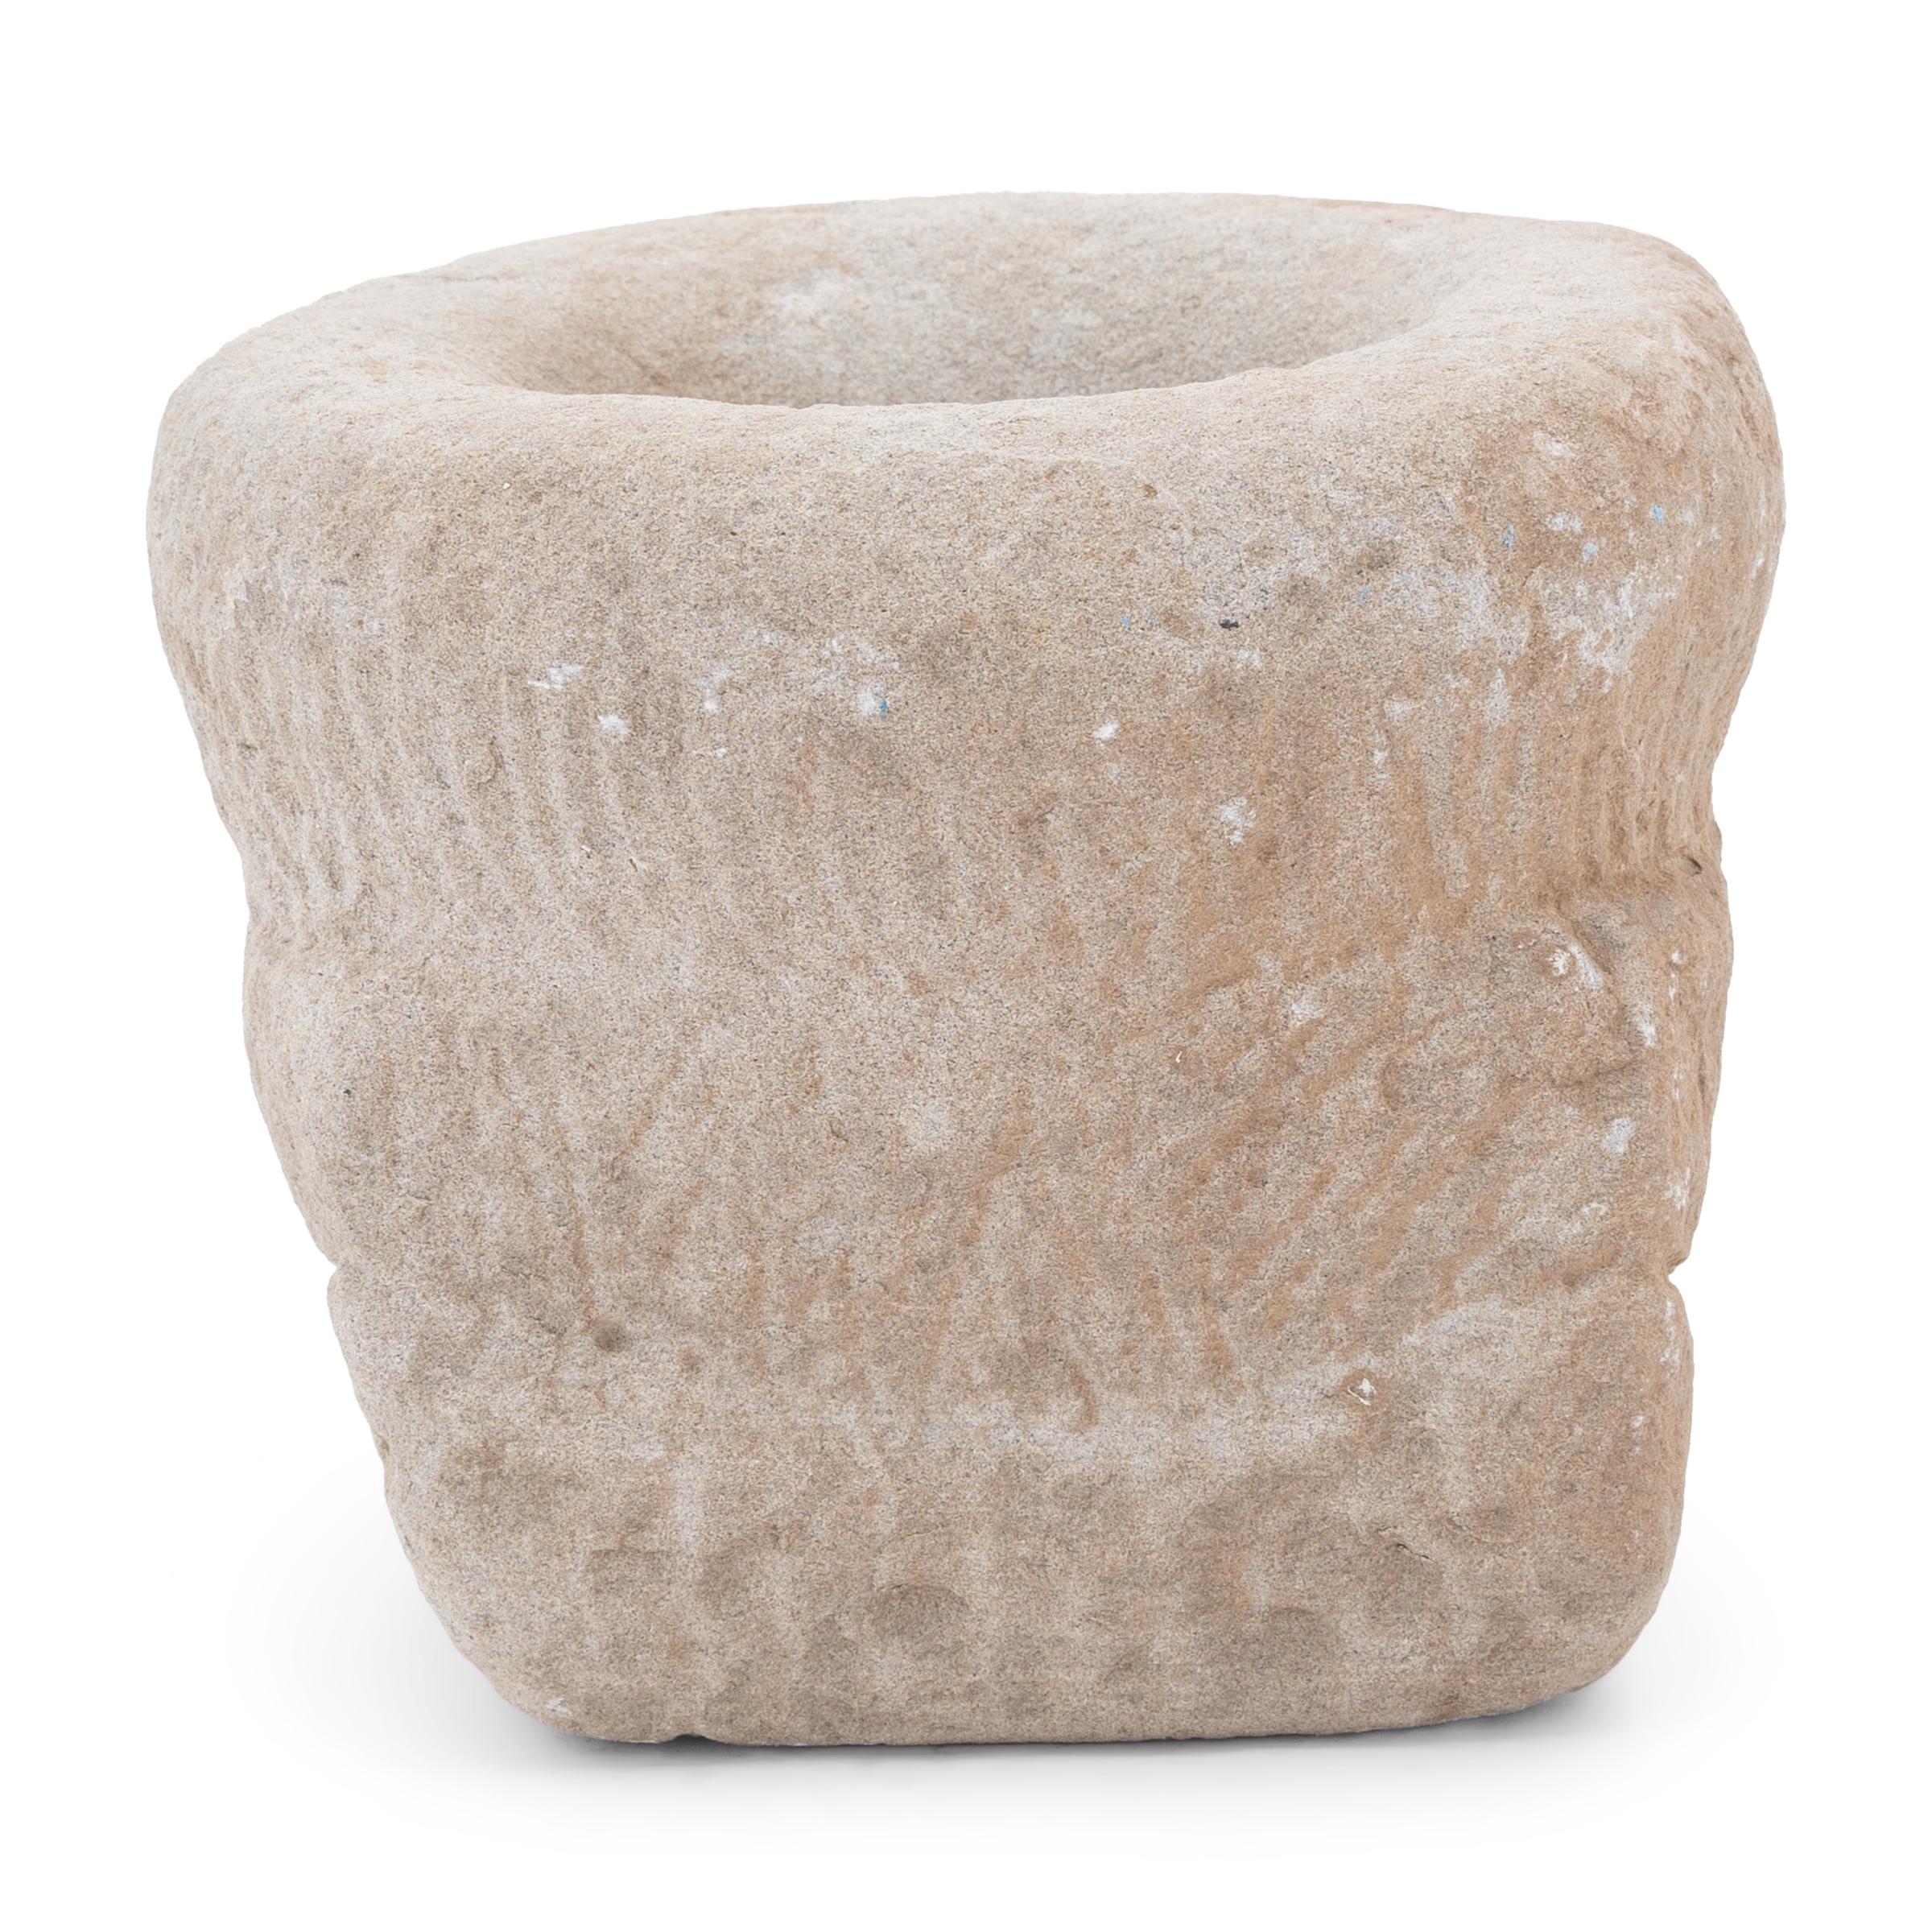 This stone mortar from the early 20th century was once used in a provincial kitchen to grind herbs, spices, rice, and other foods. Hand-carved from a solid block of limestone, the mortar has a tiered shape that transitions from a square base to a